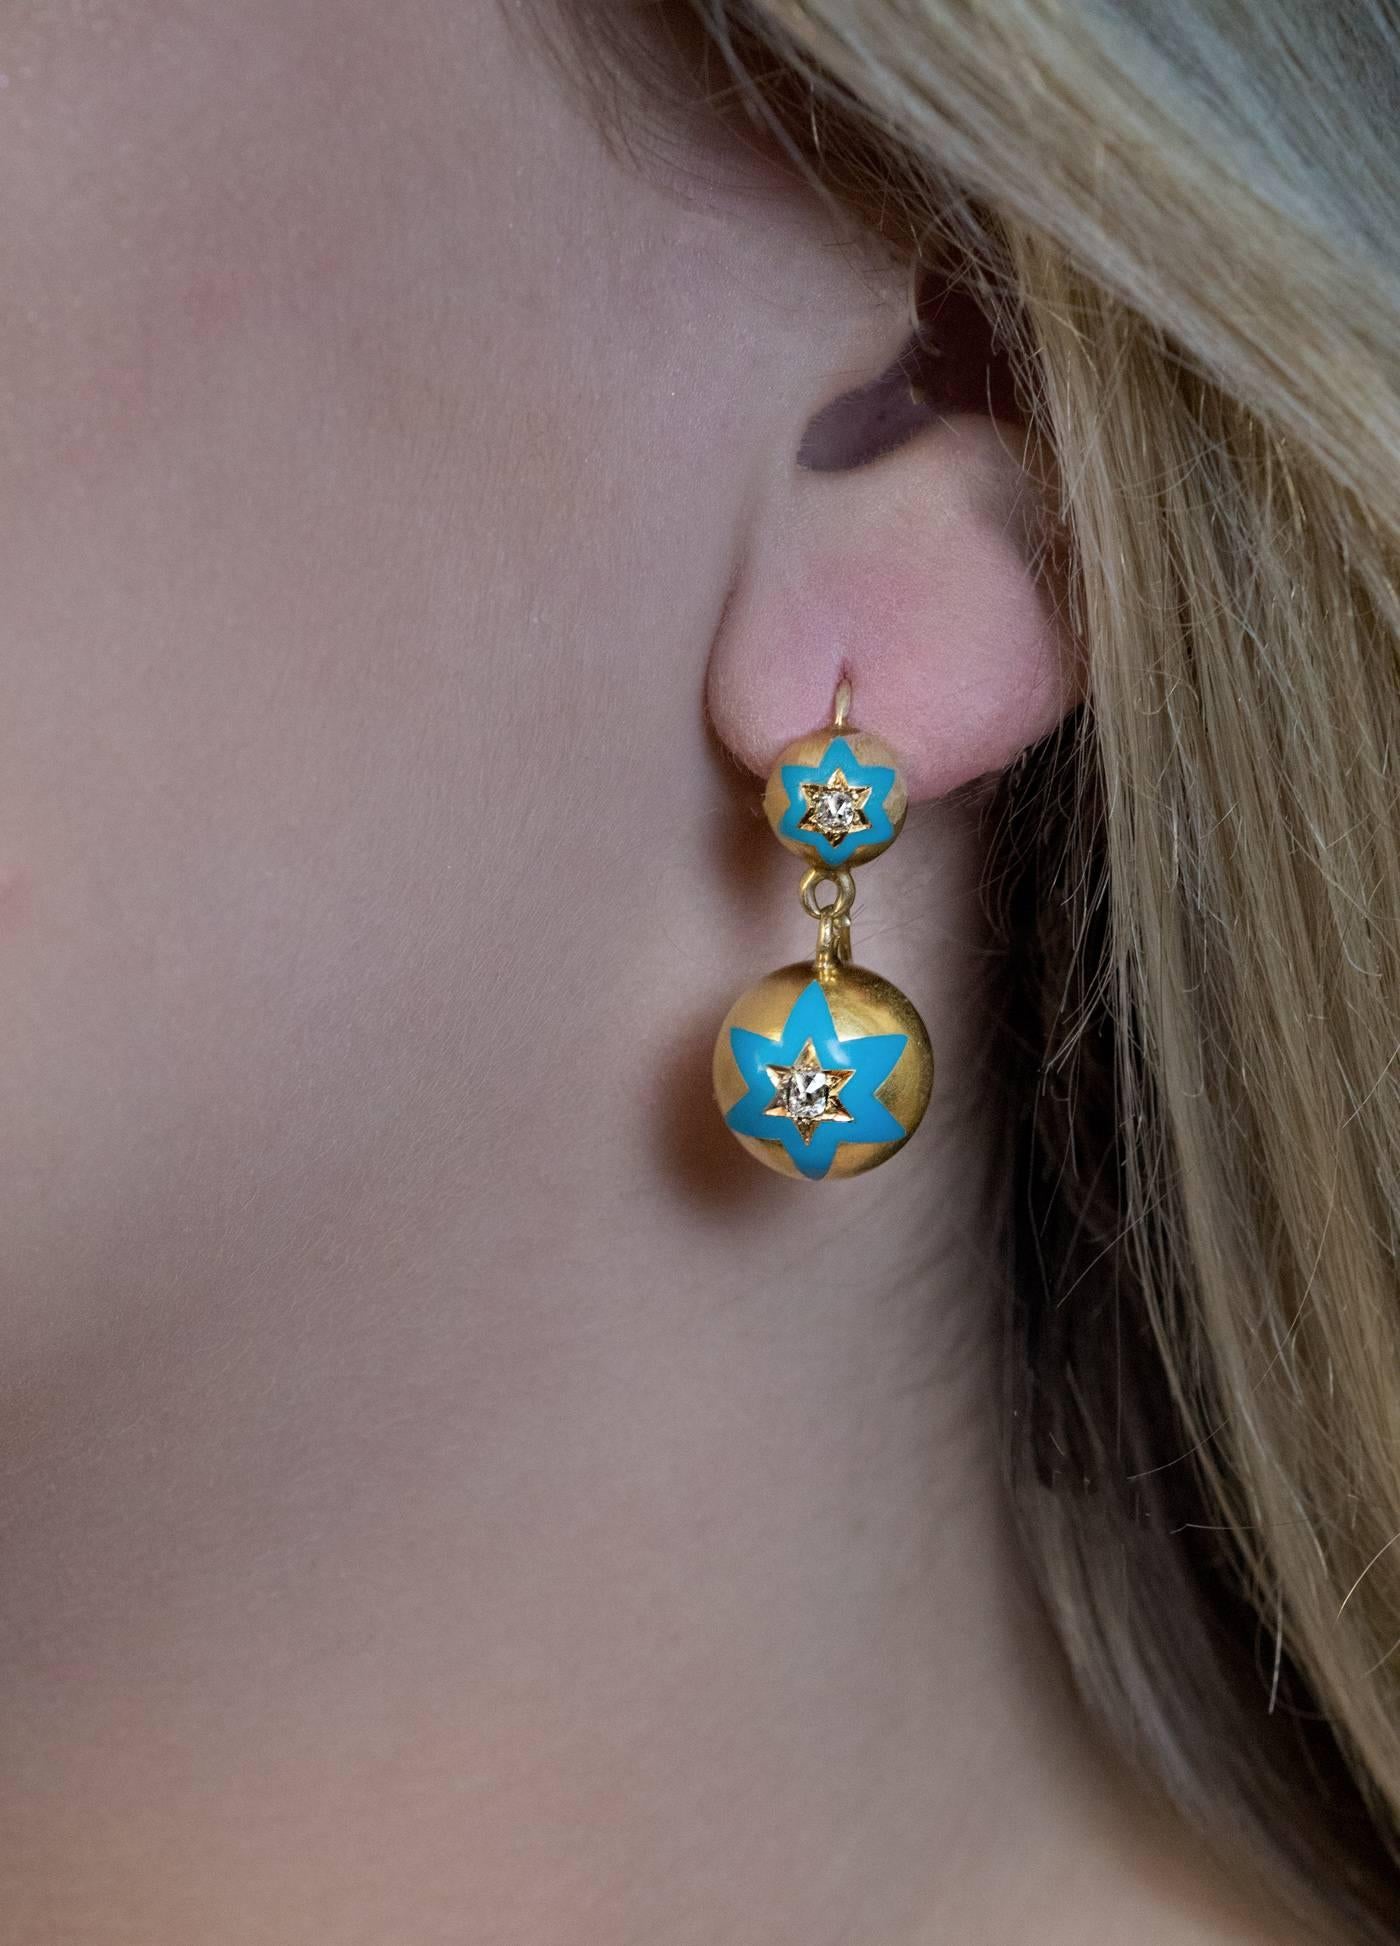 Made in St. Petersburg between 1908 and 1917

Antique 14K gold spherical earrings are embellished with turquoise blue enamel six pointed stars centered with old cushion cut diamonds.

Estimated total diamond weight is 0.60 ct.

The earrings are